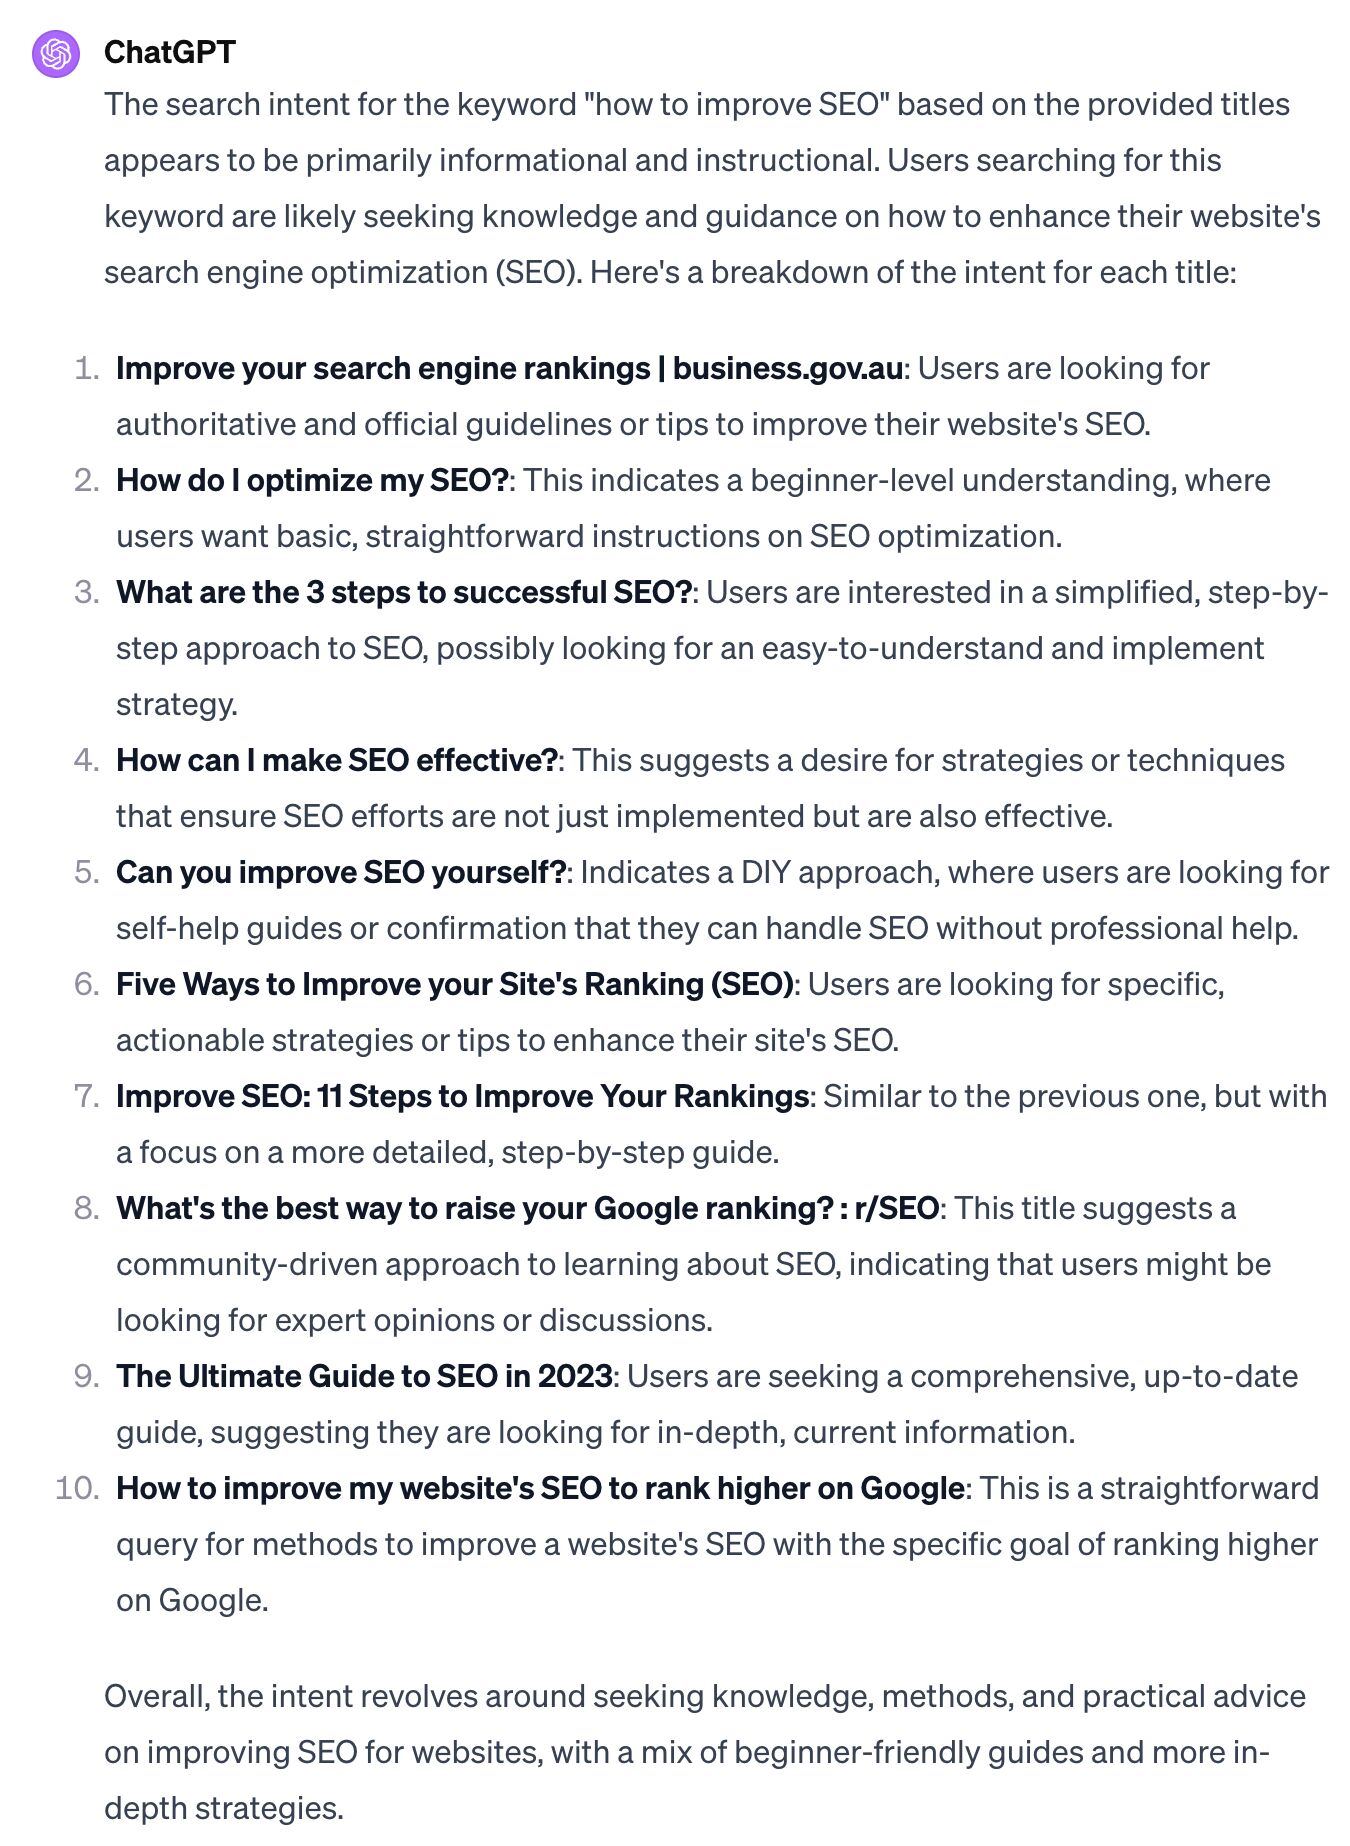 ChatGPT's analysis of search intent for the keyword "how to improve SEO"